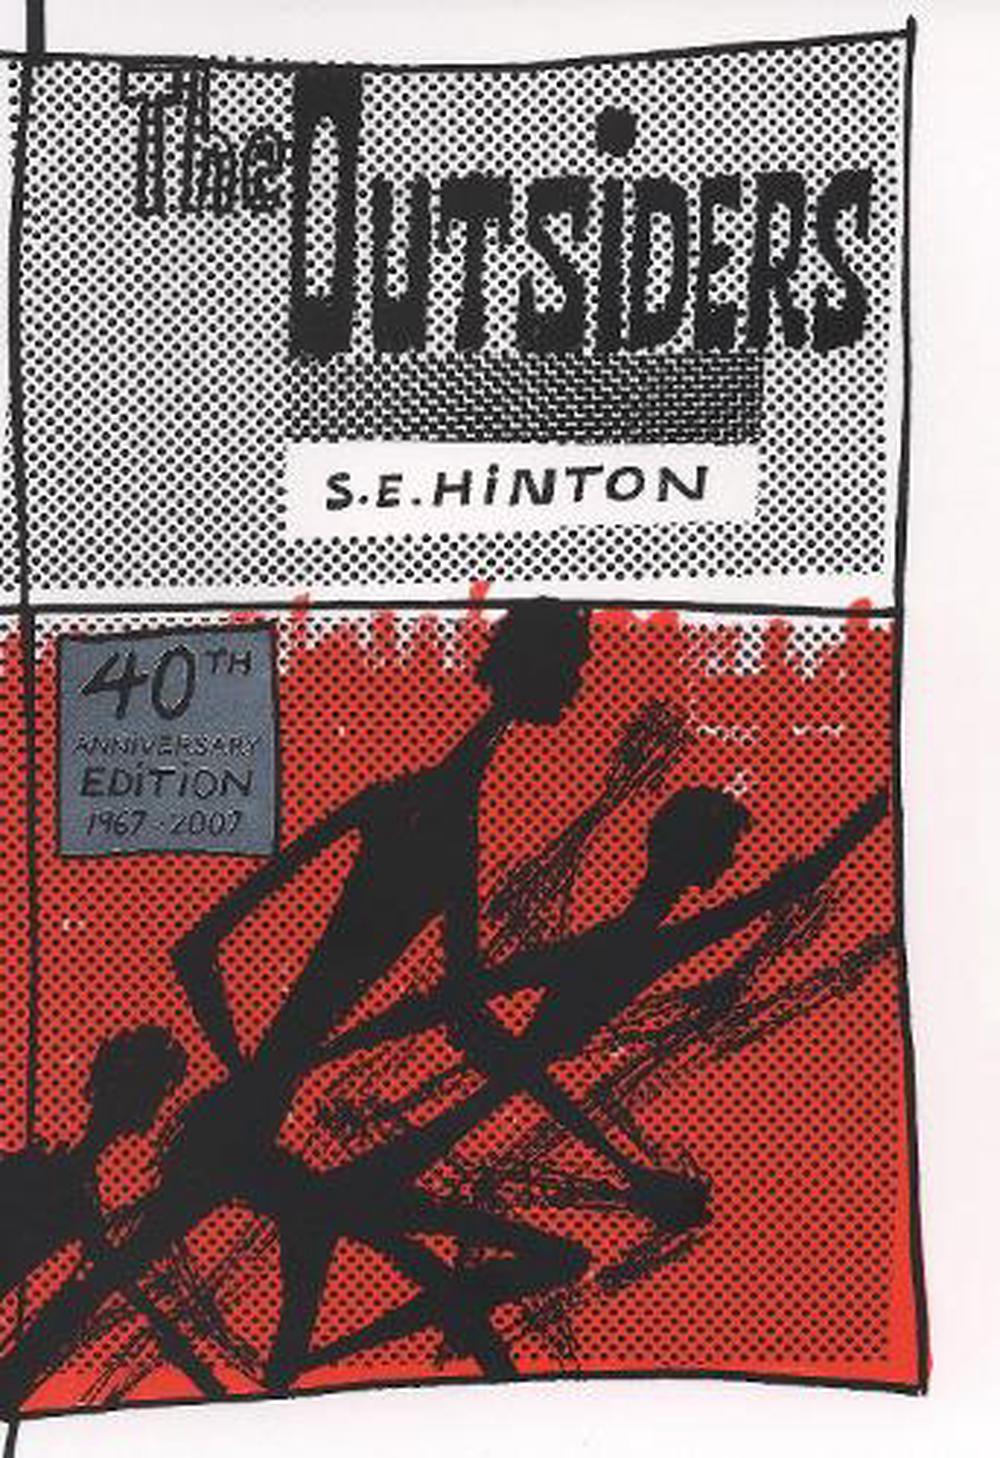 The Outsiders By Se Hinton English Hardcover Book Free Shipping 9780670062515 Ebay 2951